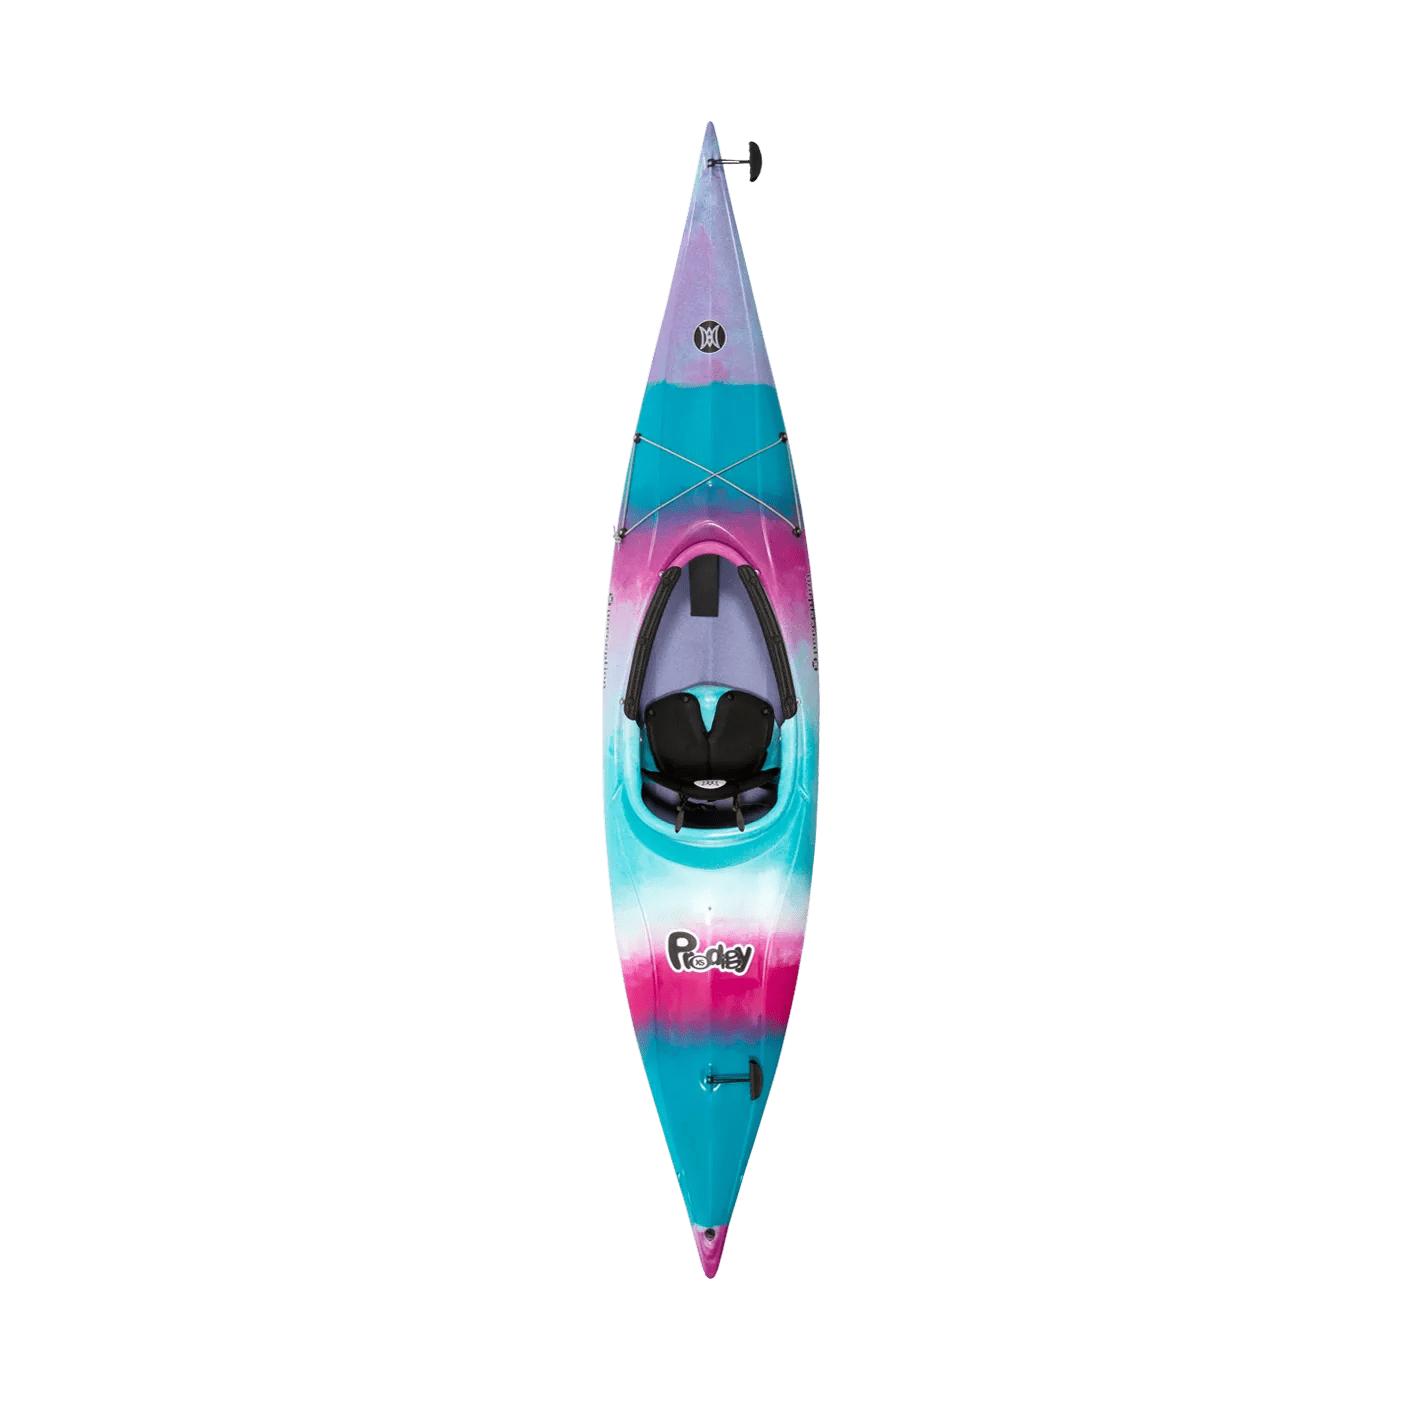 PERCEPTION - Prodigy XS Recreational Kayak - Discontinued - Violet - 9330335173 - TOP